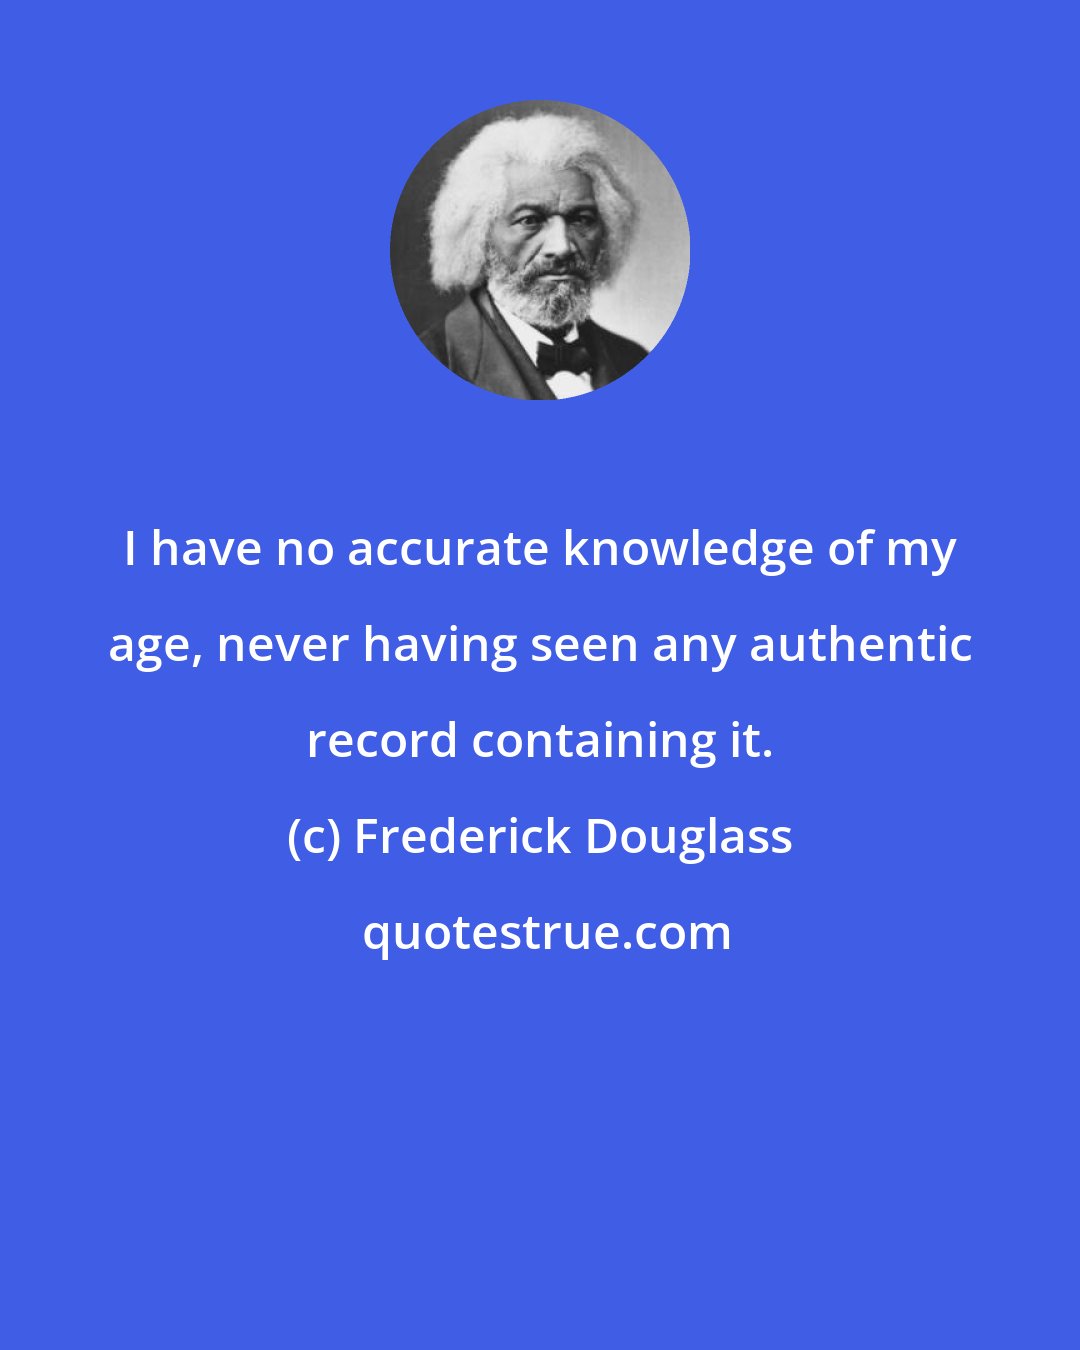 Frederick Douglass: I have no accurate knowledge of my age, never having seen any authentic record containing it.